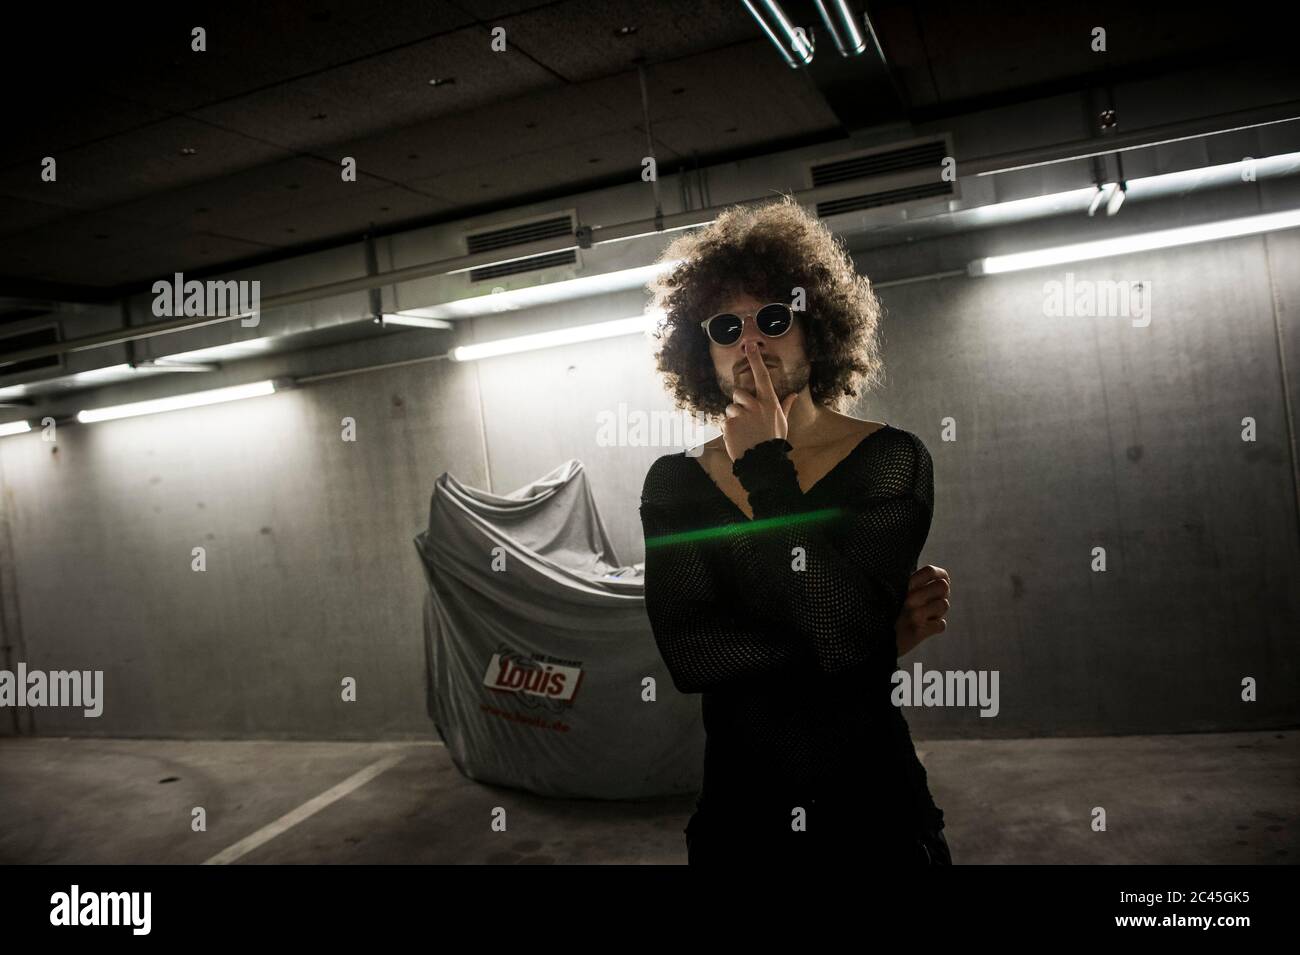 Man with curly hair in a parking garage Stock Photo